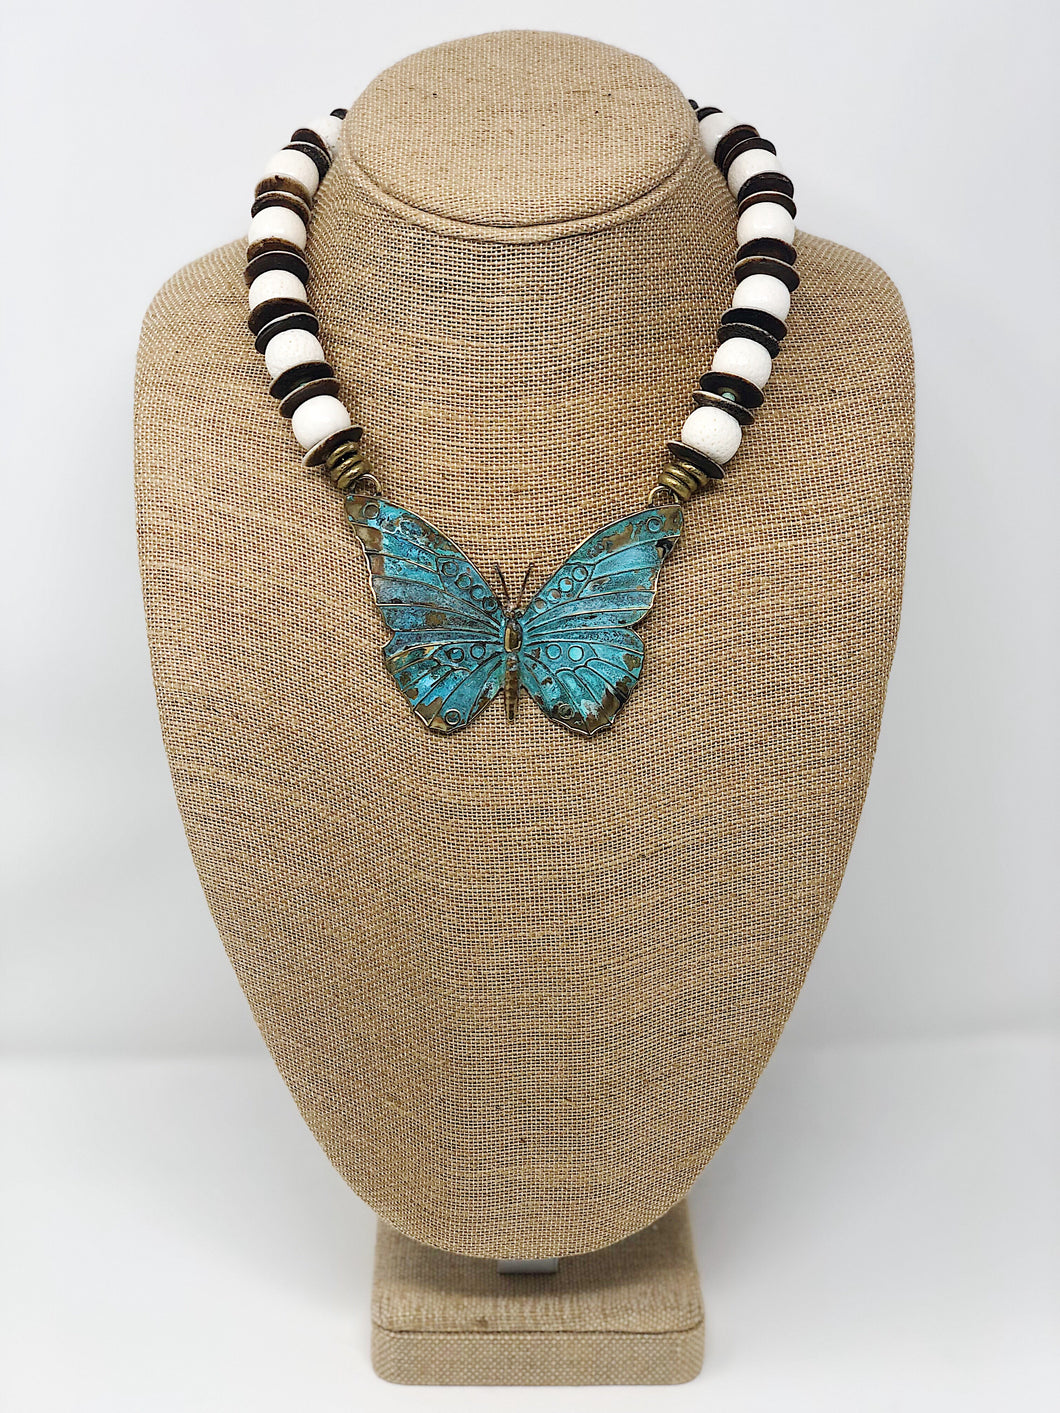 Coral and Bone necklace with Butterfly pendant